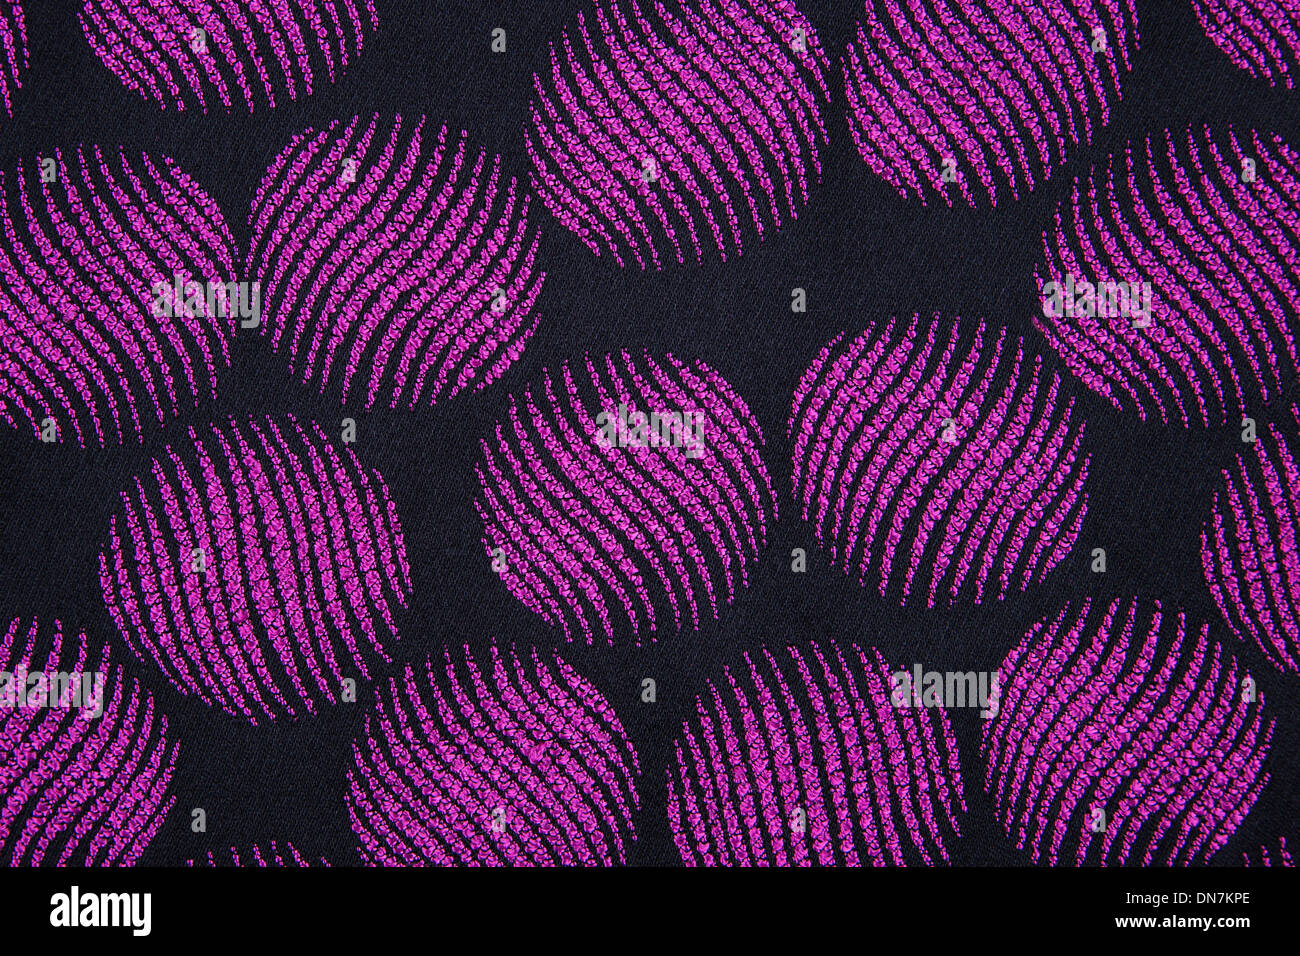 Material in geometric patterns, a colored textile background. Stock Photo